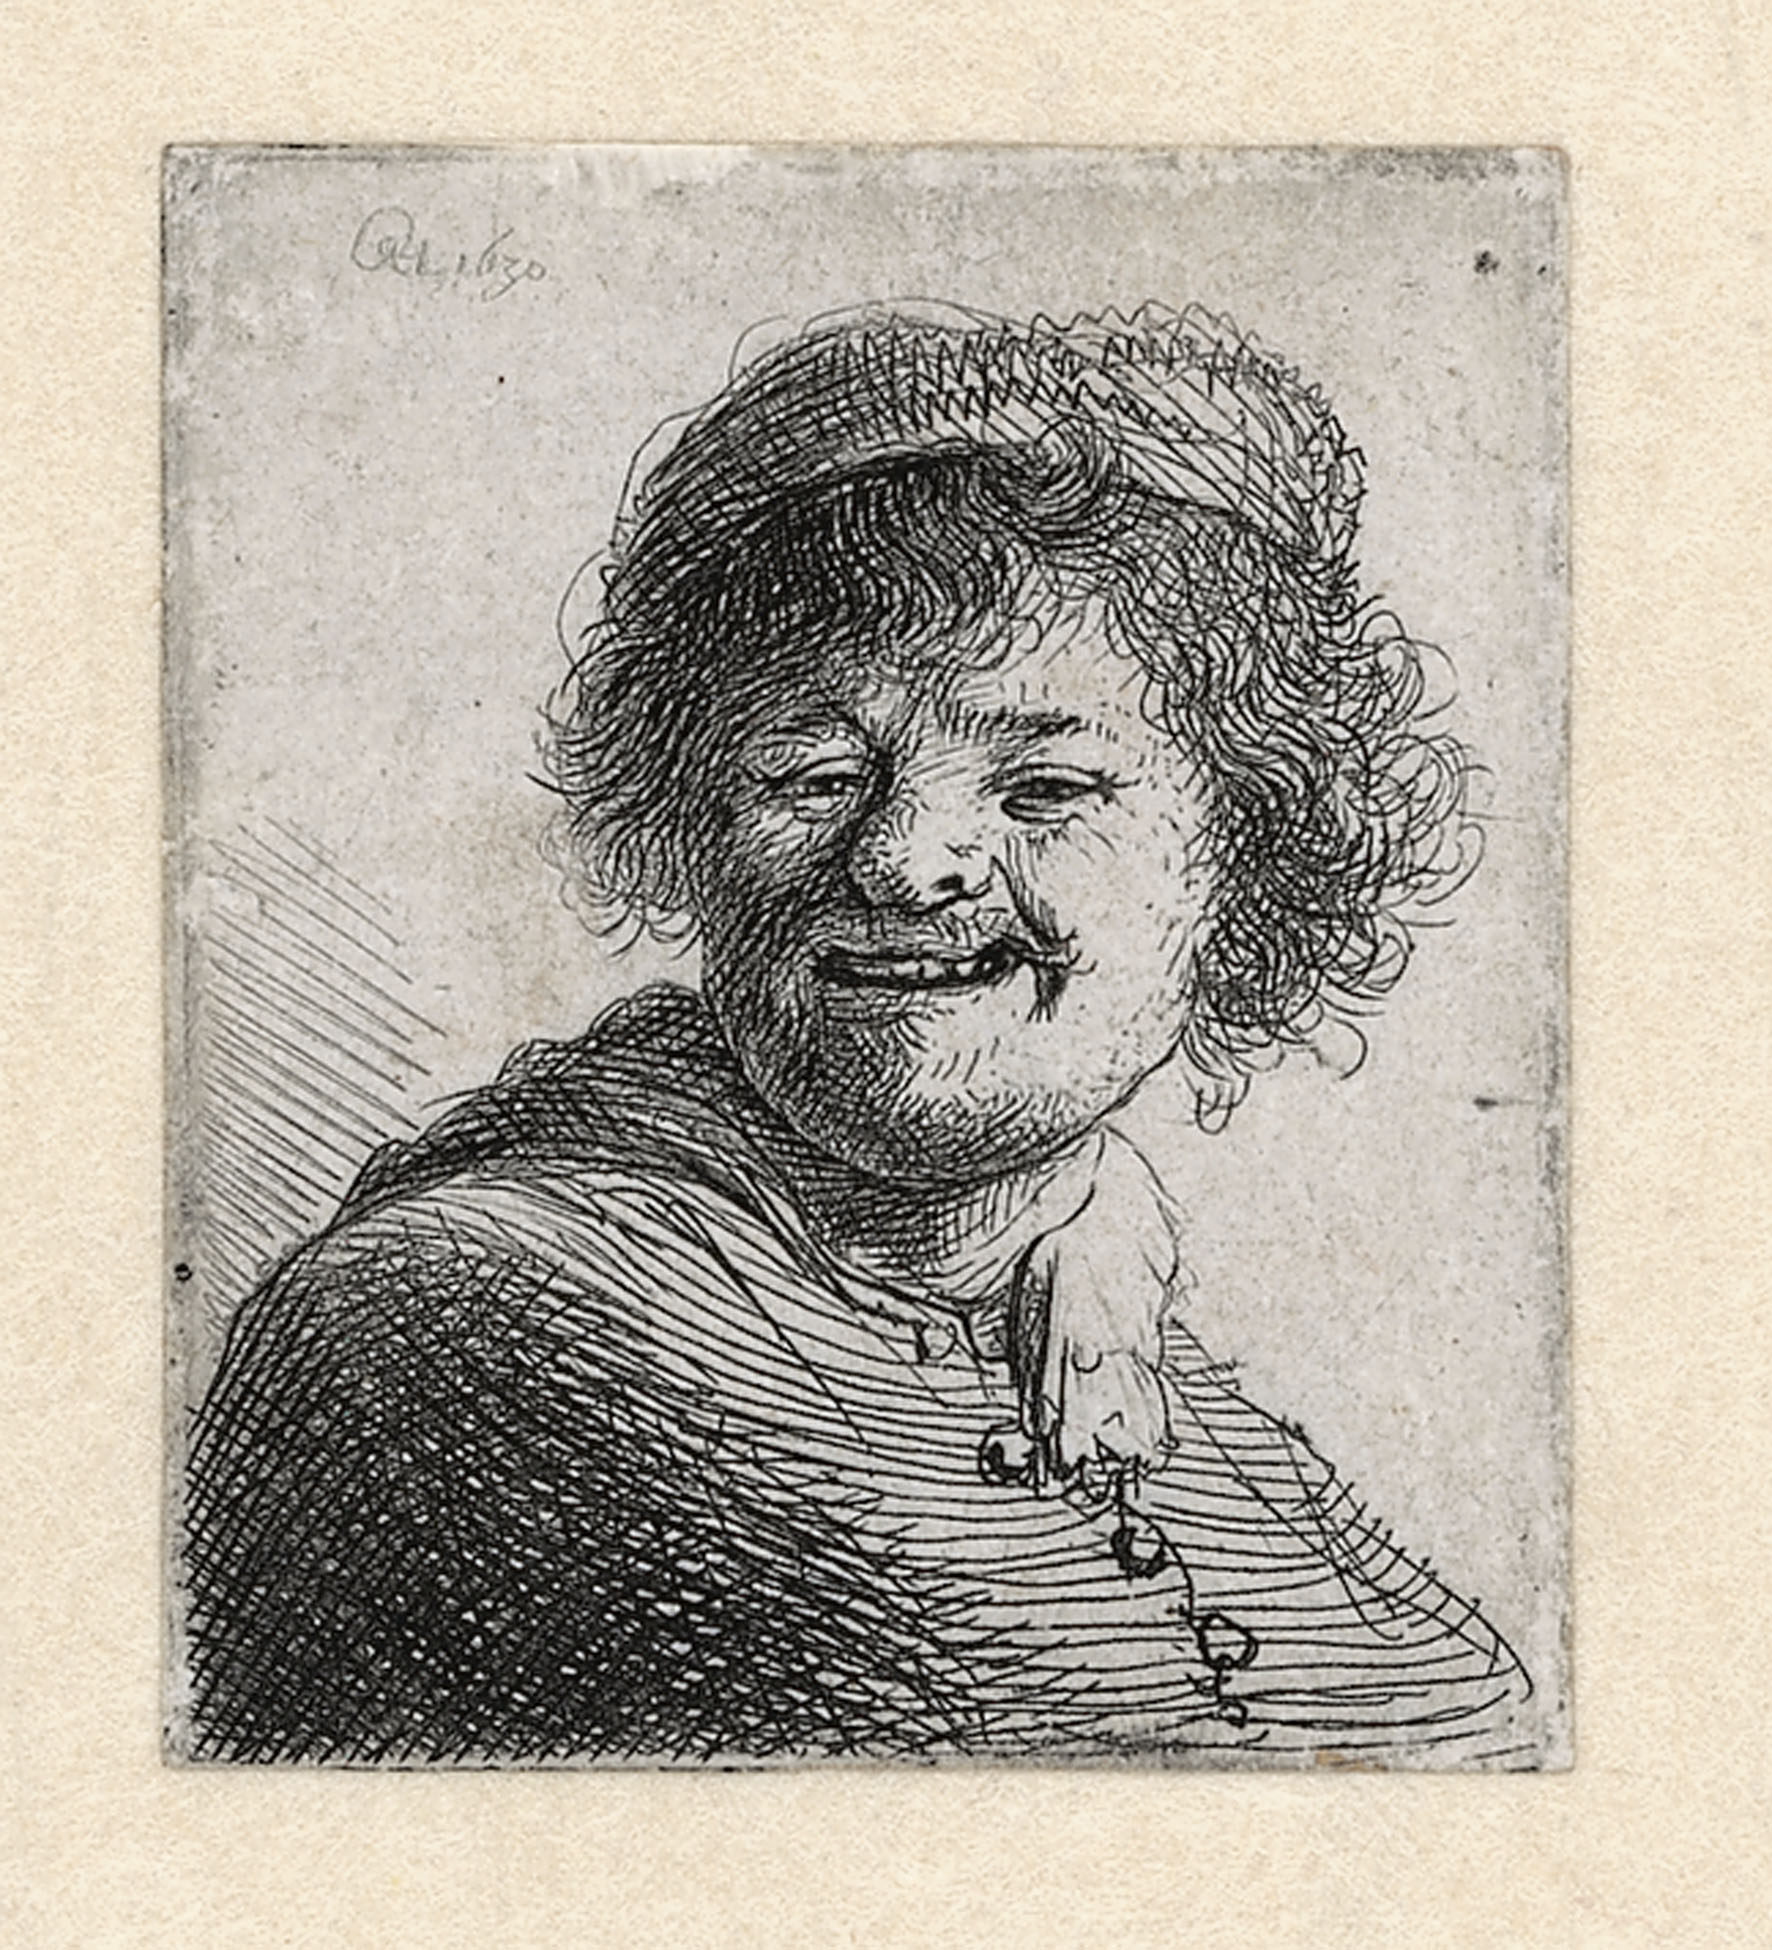 Self-portrait in a Cap, Wide-eyed and Open-mouthed by Rembrandt van Rijn - 1630 - 50 x 45 cm Rembrandthuis